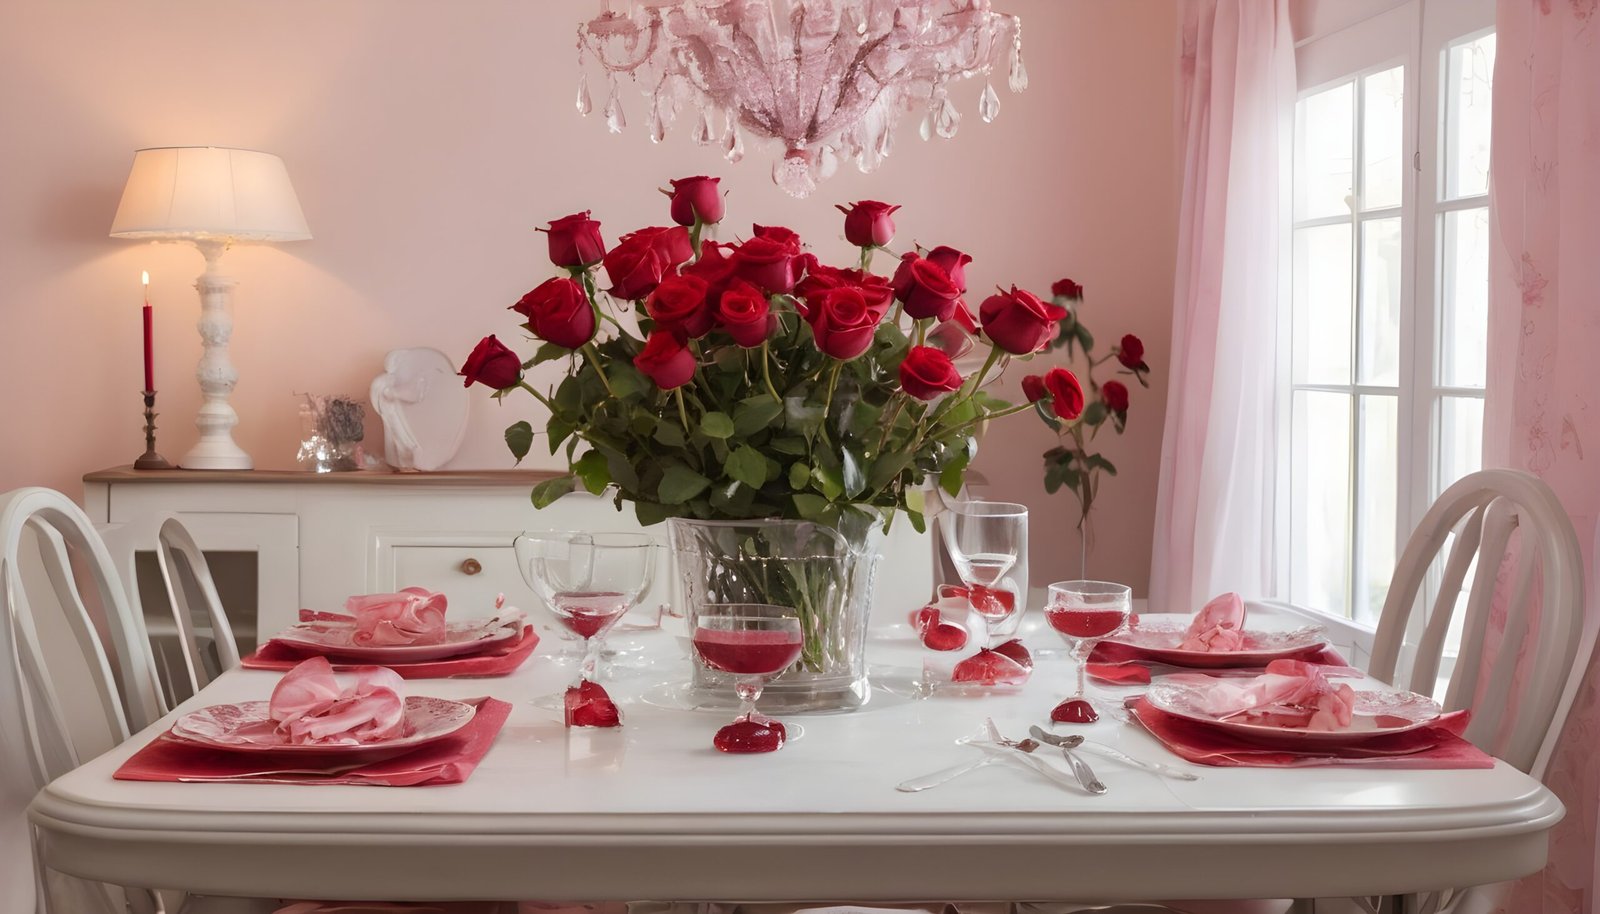 Valentine's Day Decorations, Romantic dining room with red roses and red and pink decorations.